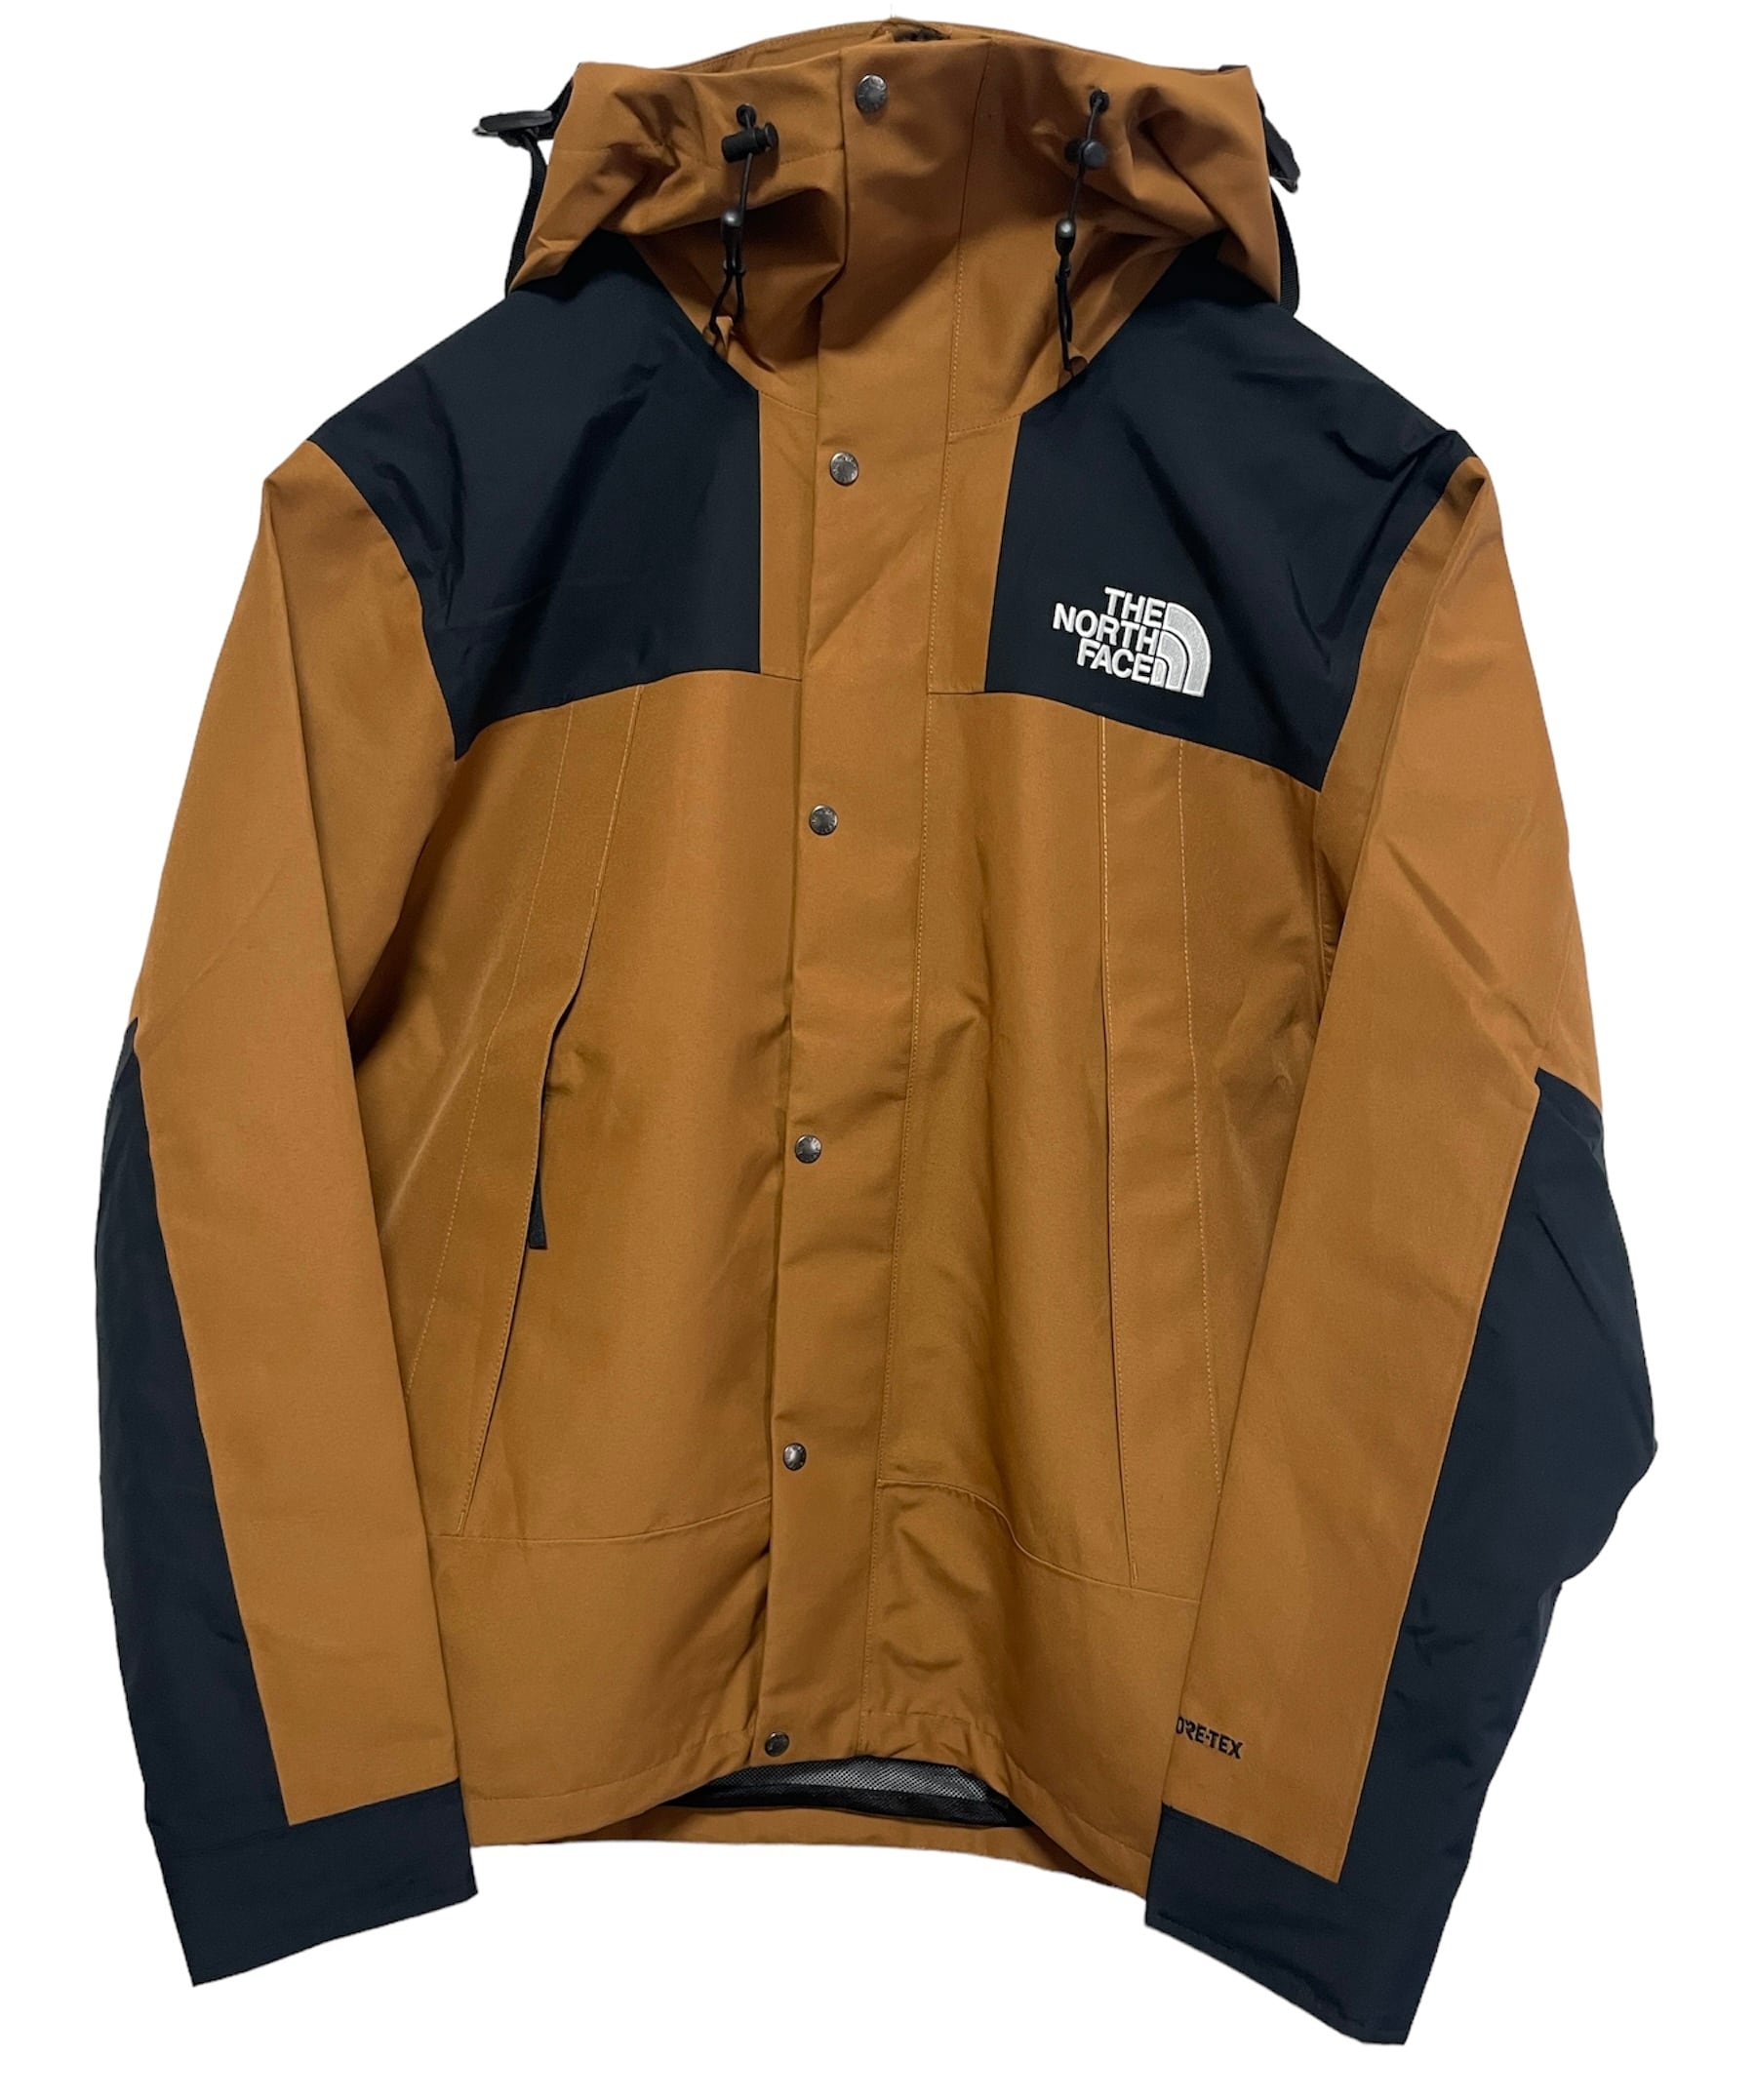 THE NORTH FACE MOUNTAIN JACKET XLePTFE裏地